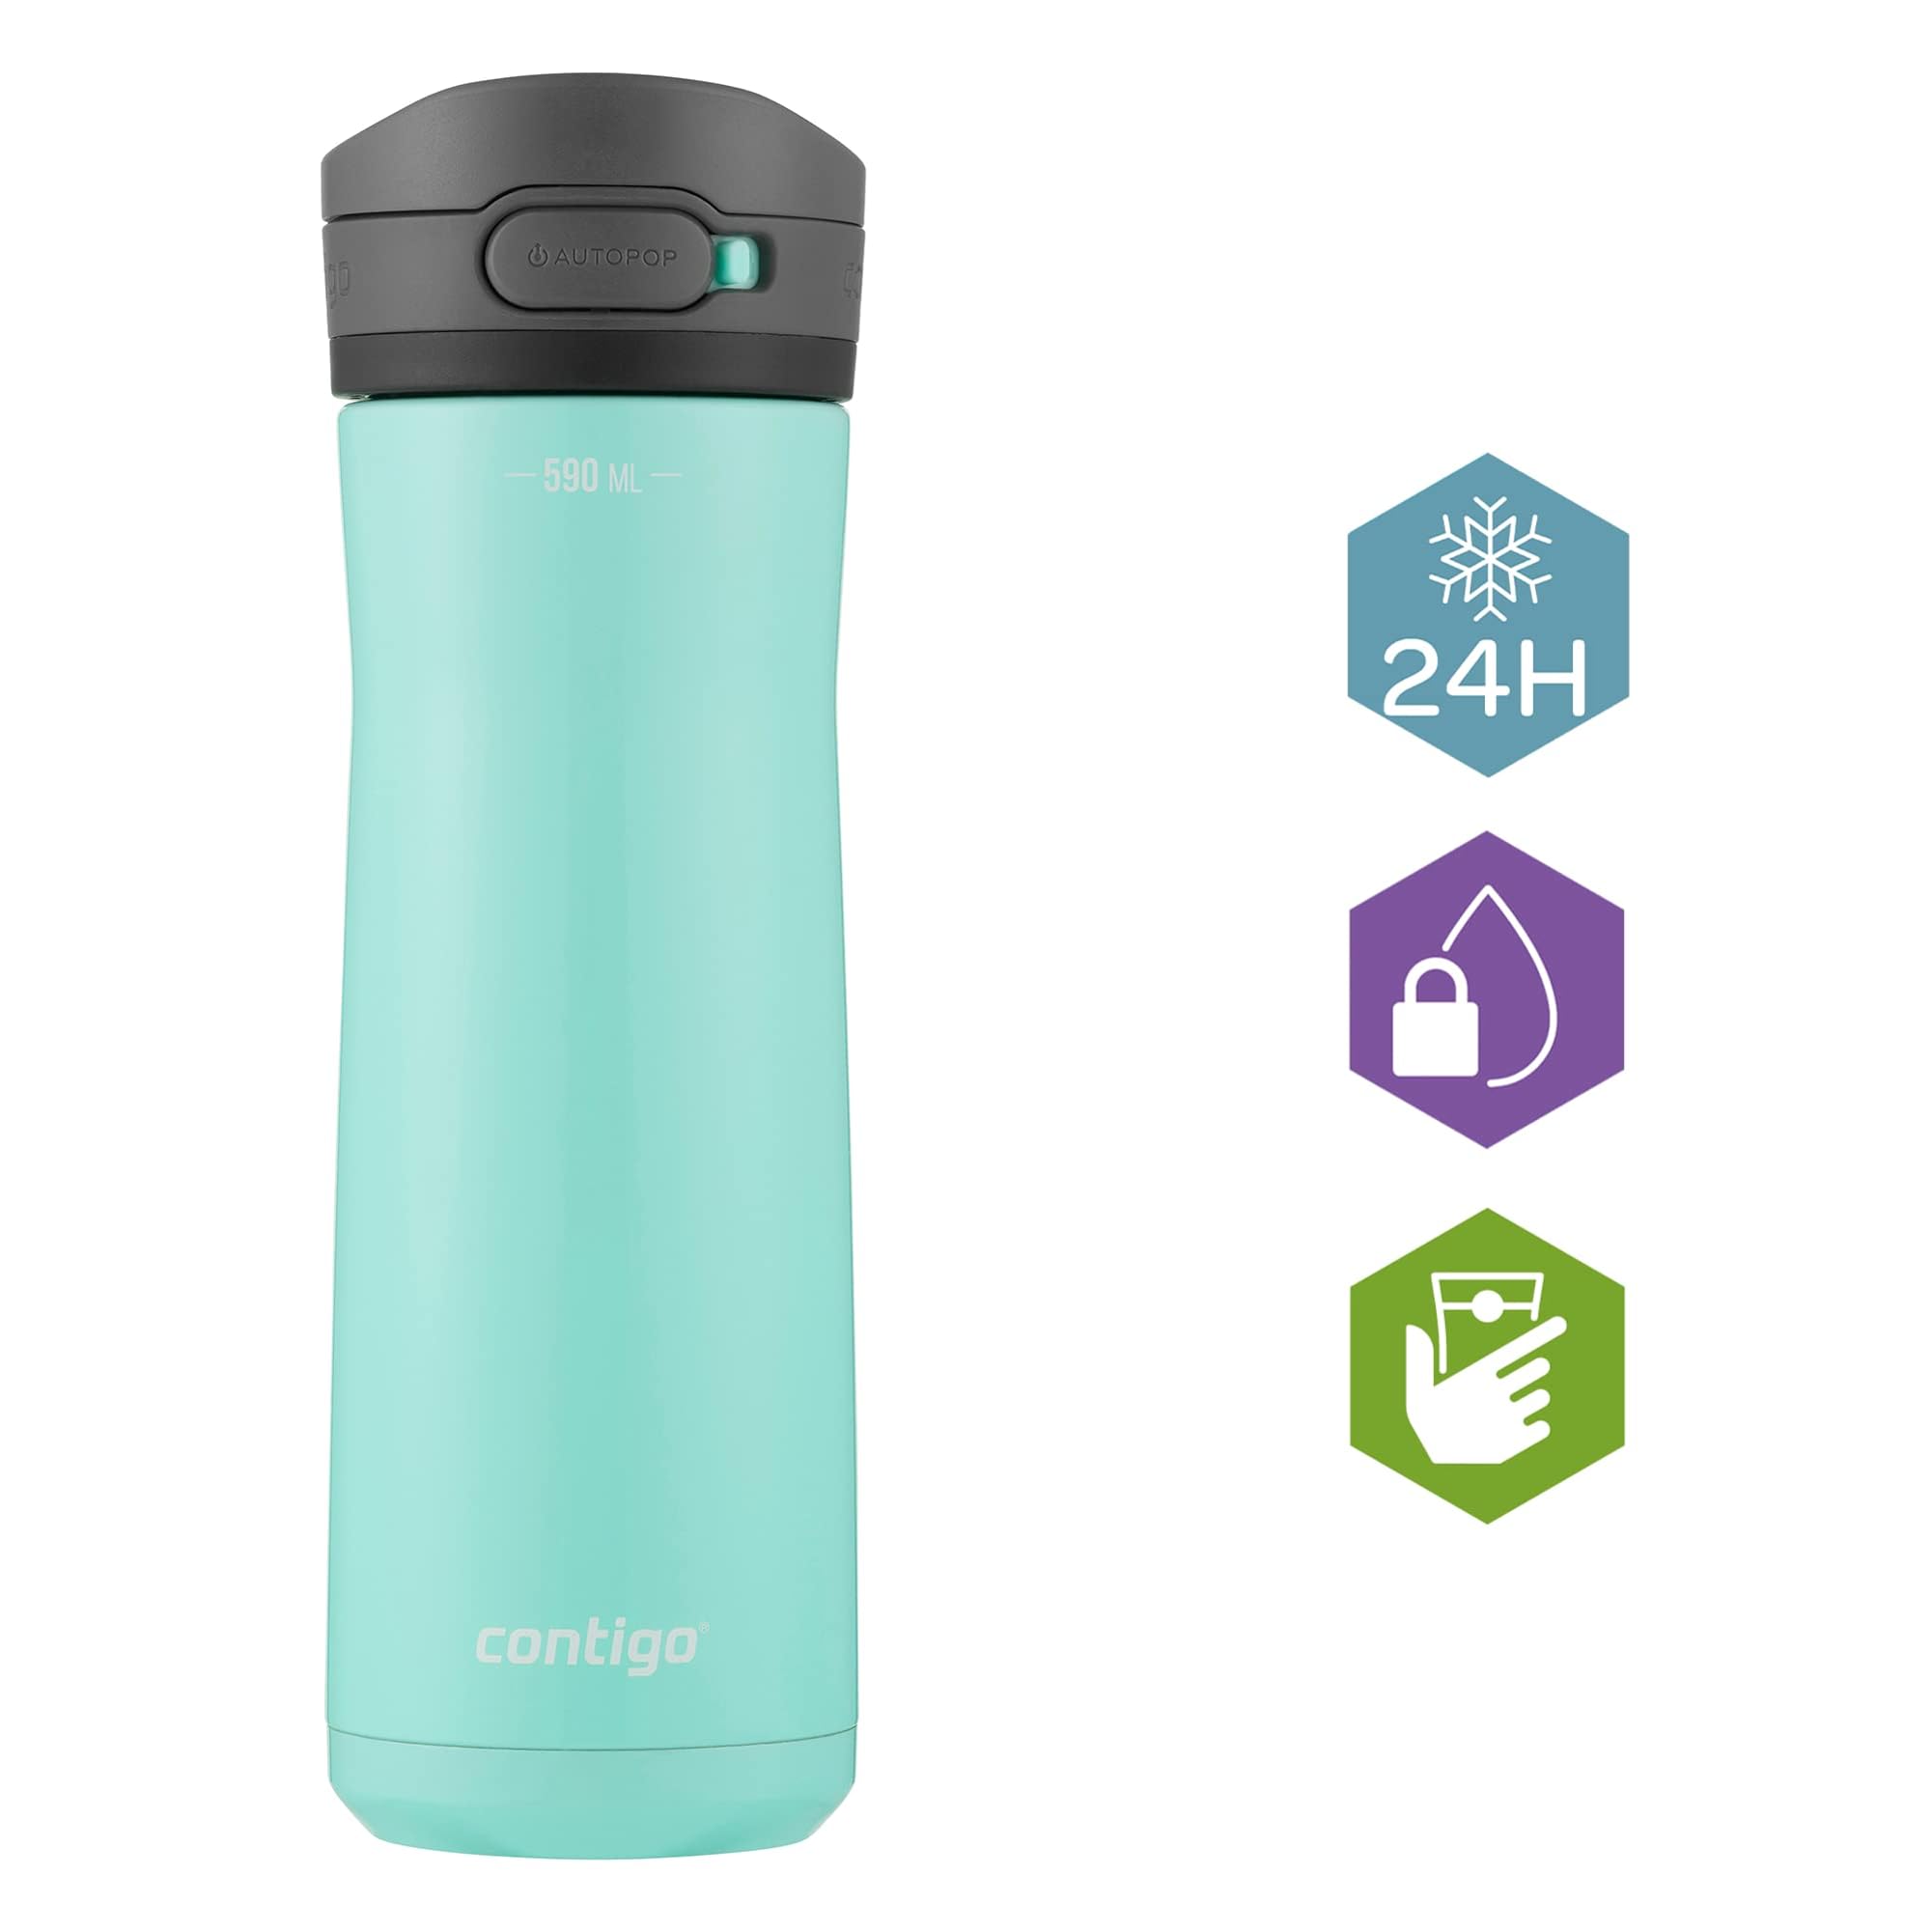 Contigo Jackson Chill drinks bottle, large BPA-free stainless steel water bottle, 100% leakproof, keeps drinks cool for up to 24 hours; insulated bottle for sports, cycling, jogging, hiking, 590 ml